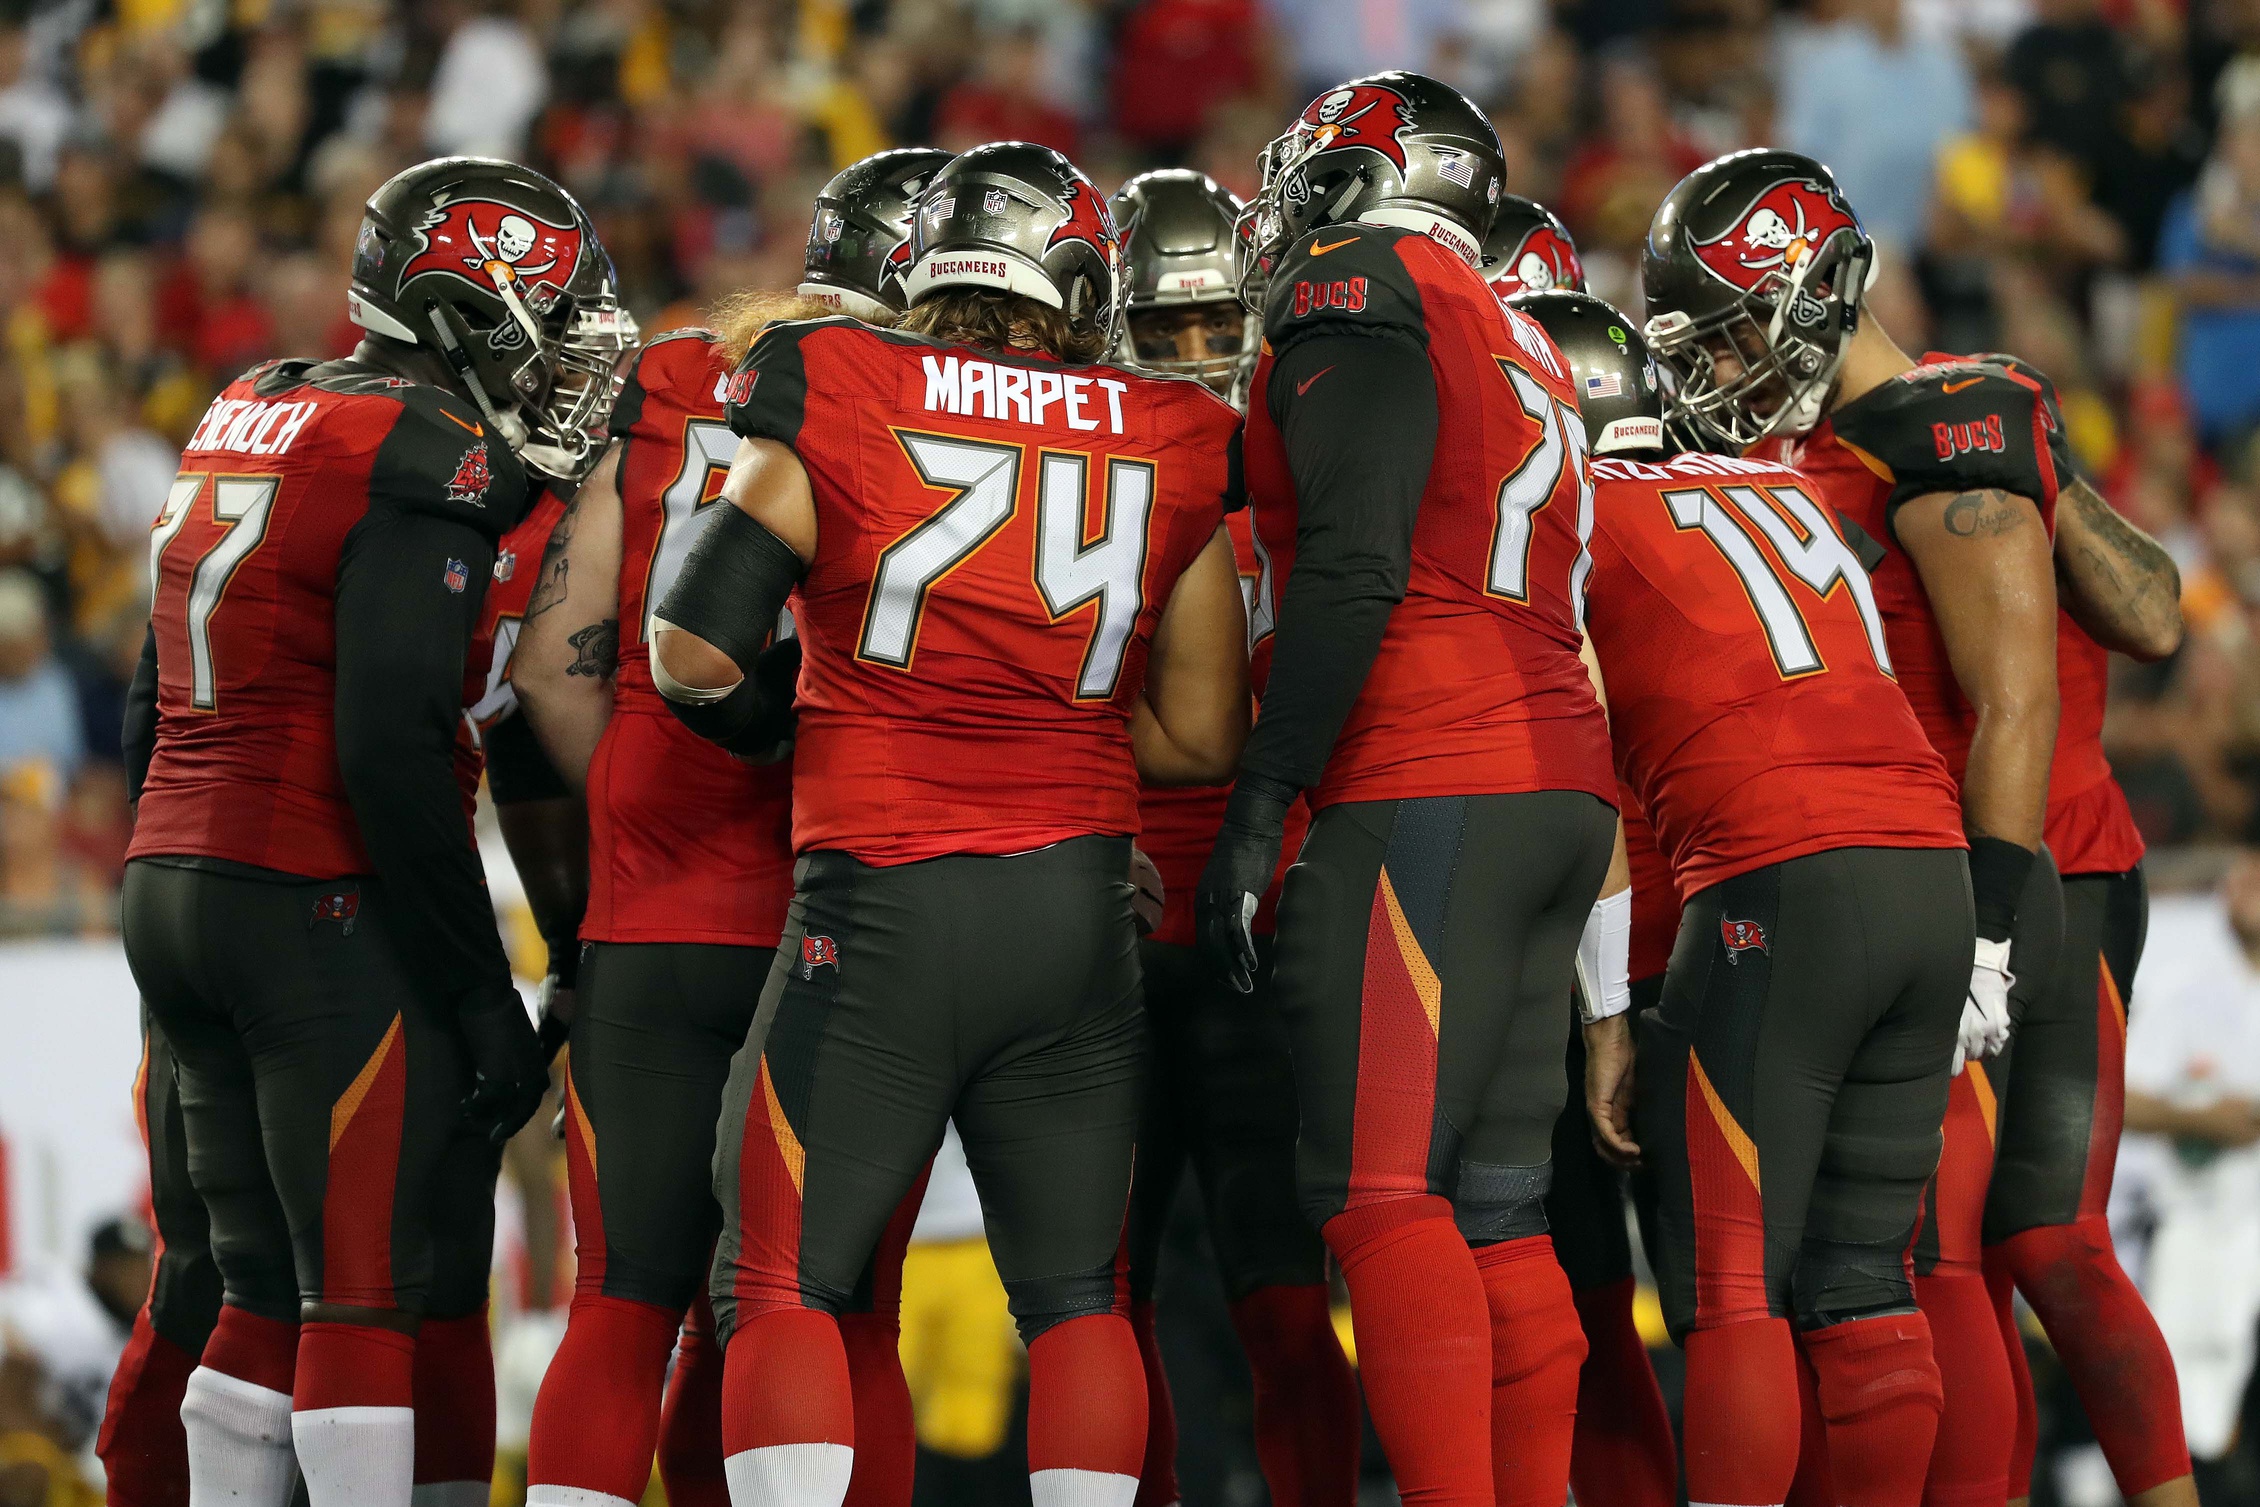 2020 Nfl Team Preview Series Tampa Bay Buccaneers Nfl News Rankings And Statistics Pff